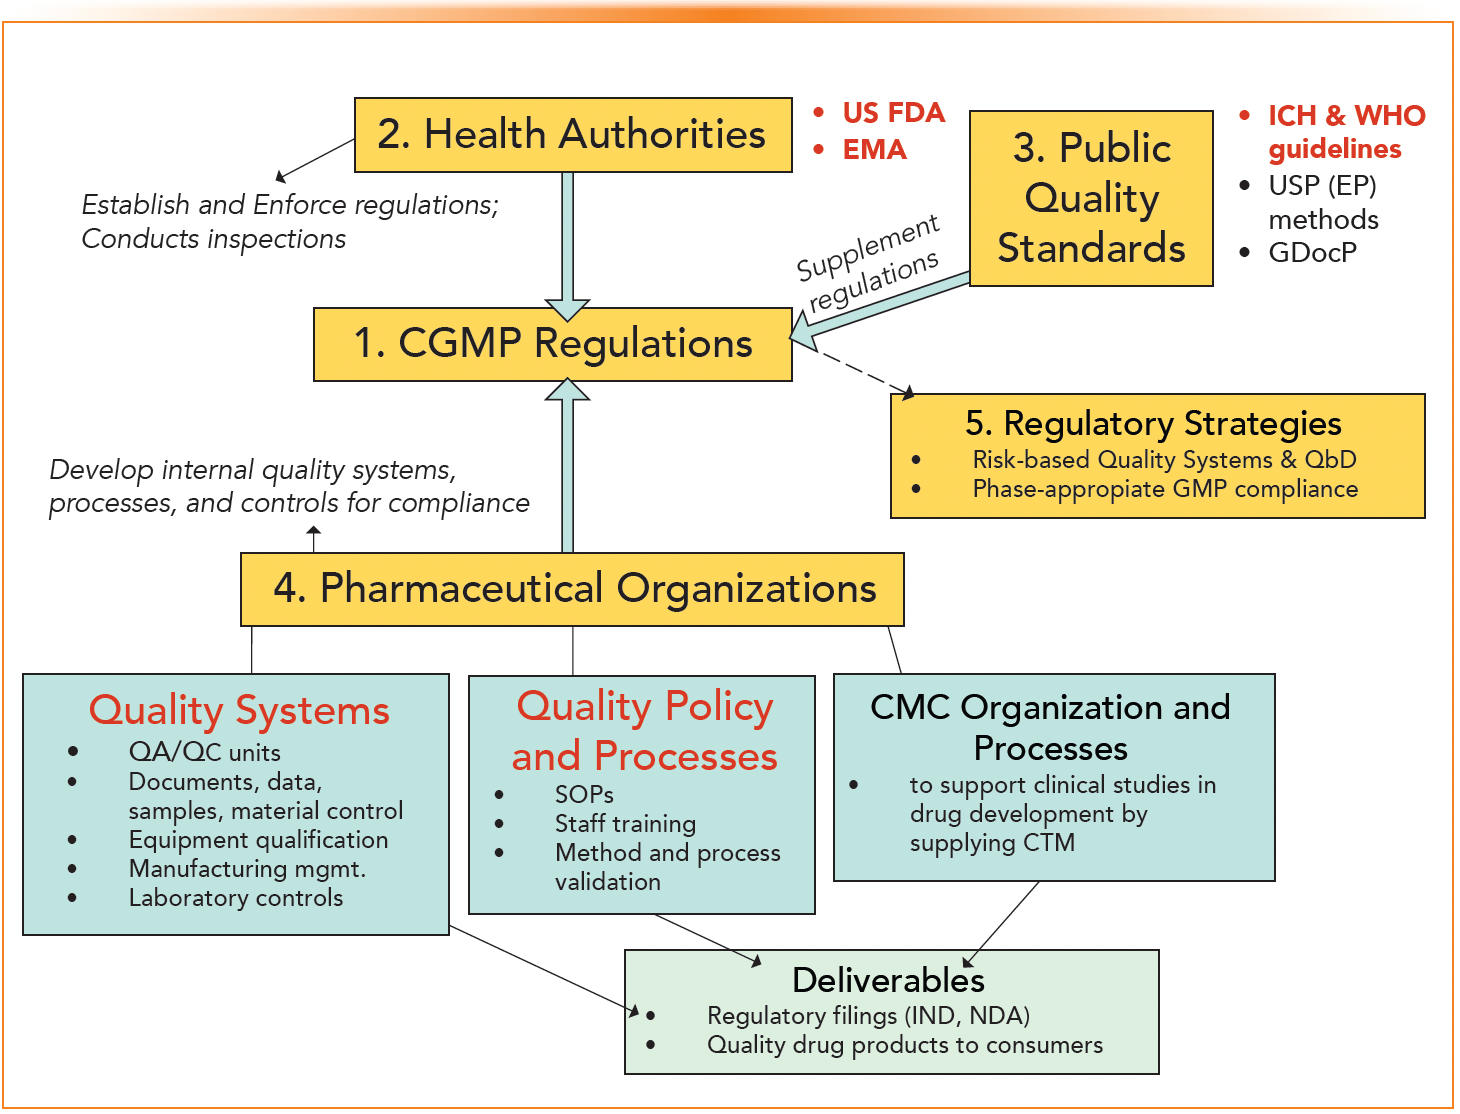 FIGURE 1: A pictorial portrayal of the pharmaceutical regulatory processes, categorized into five sections to help readers better understand these complex compliance processes.